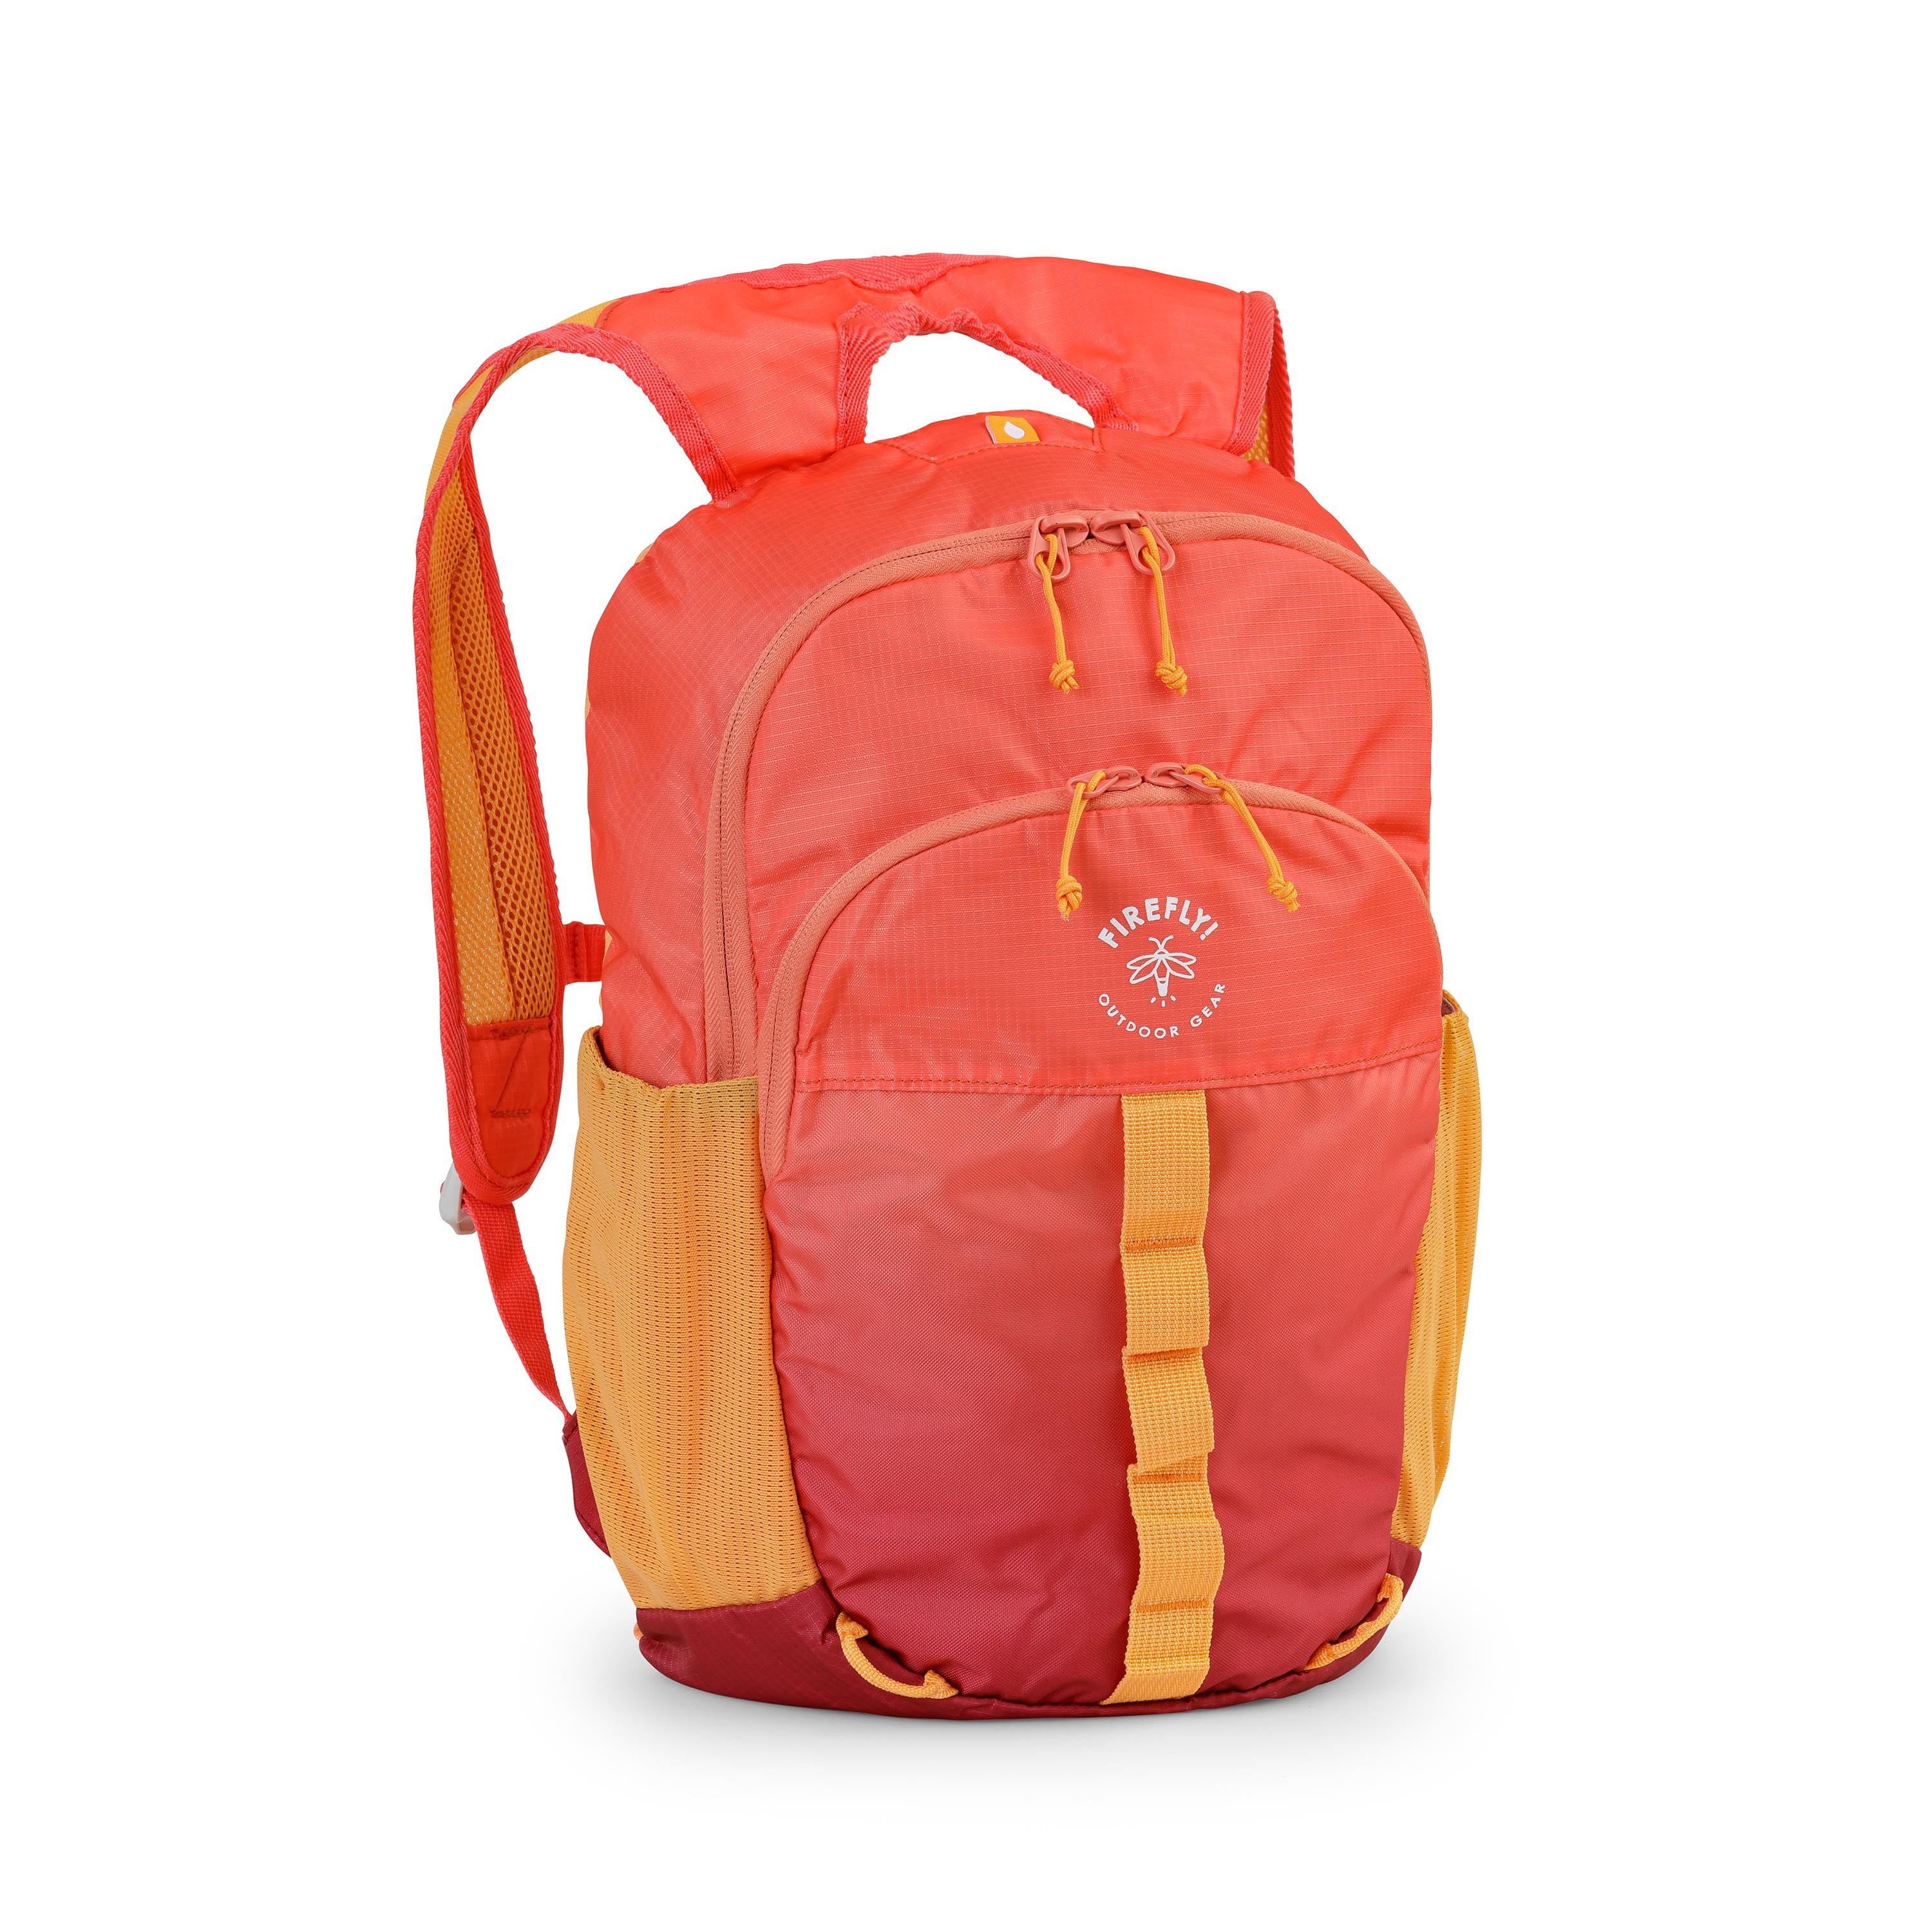 Firefly! Outdoor Gear Youth Outdoor Camping Backpack - Red/Orange, Unisex, Ages 9-12 (13 liter), Size: 13 Large